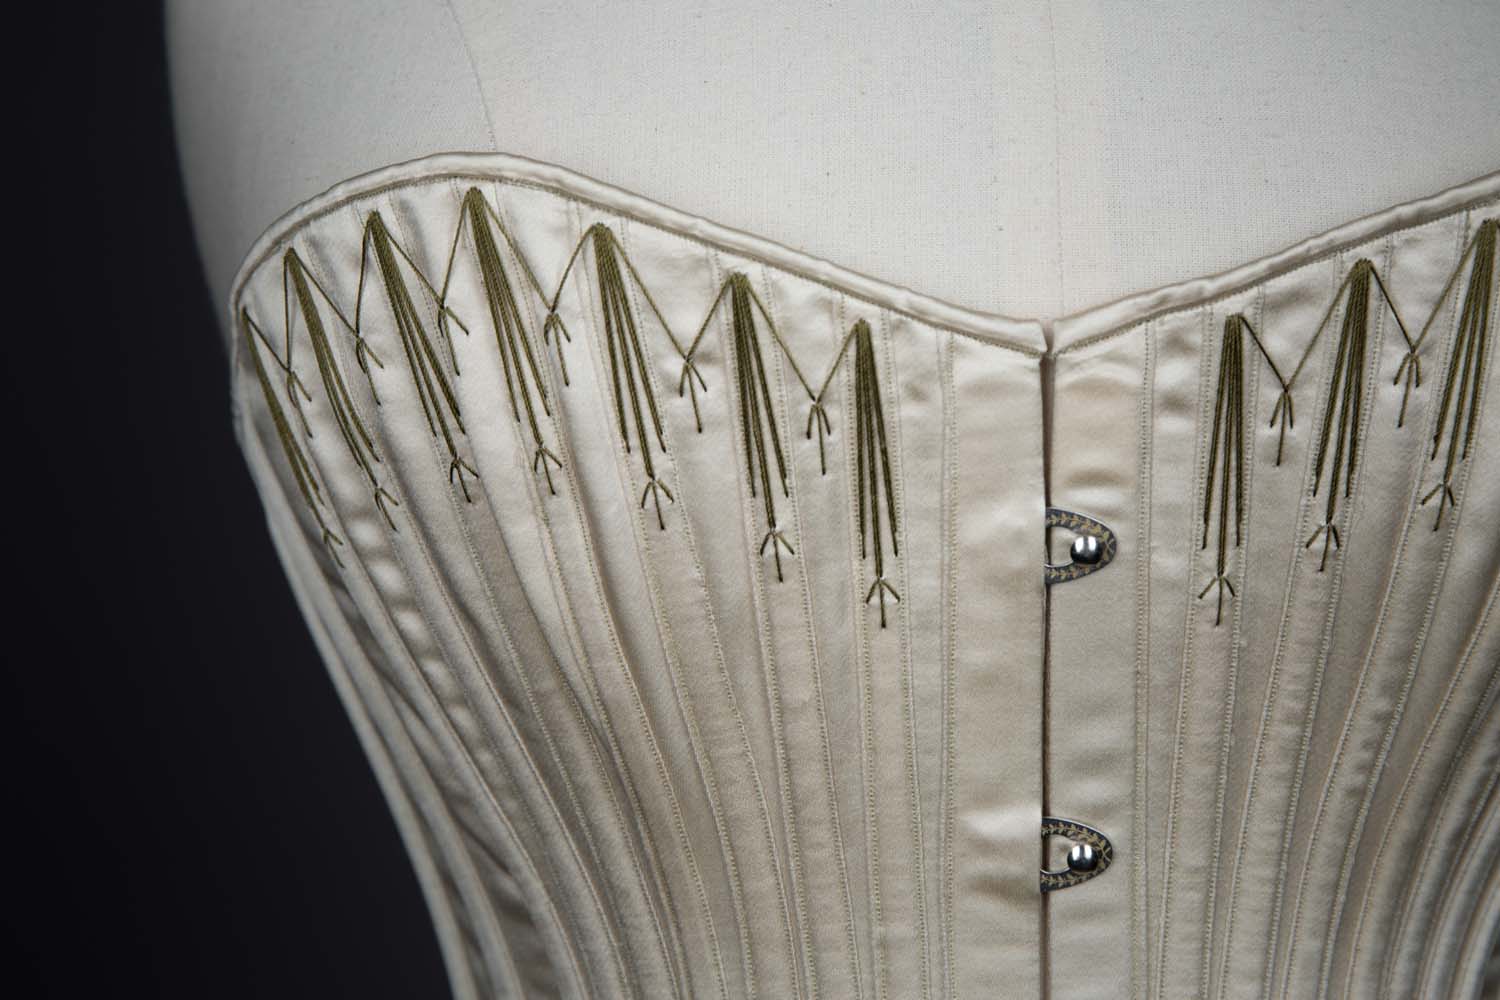 c. 1890s Symington Reproduction Silk Corset By Cathy Hay. The Underpinnings Museum. Photography Tigz Rice